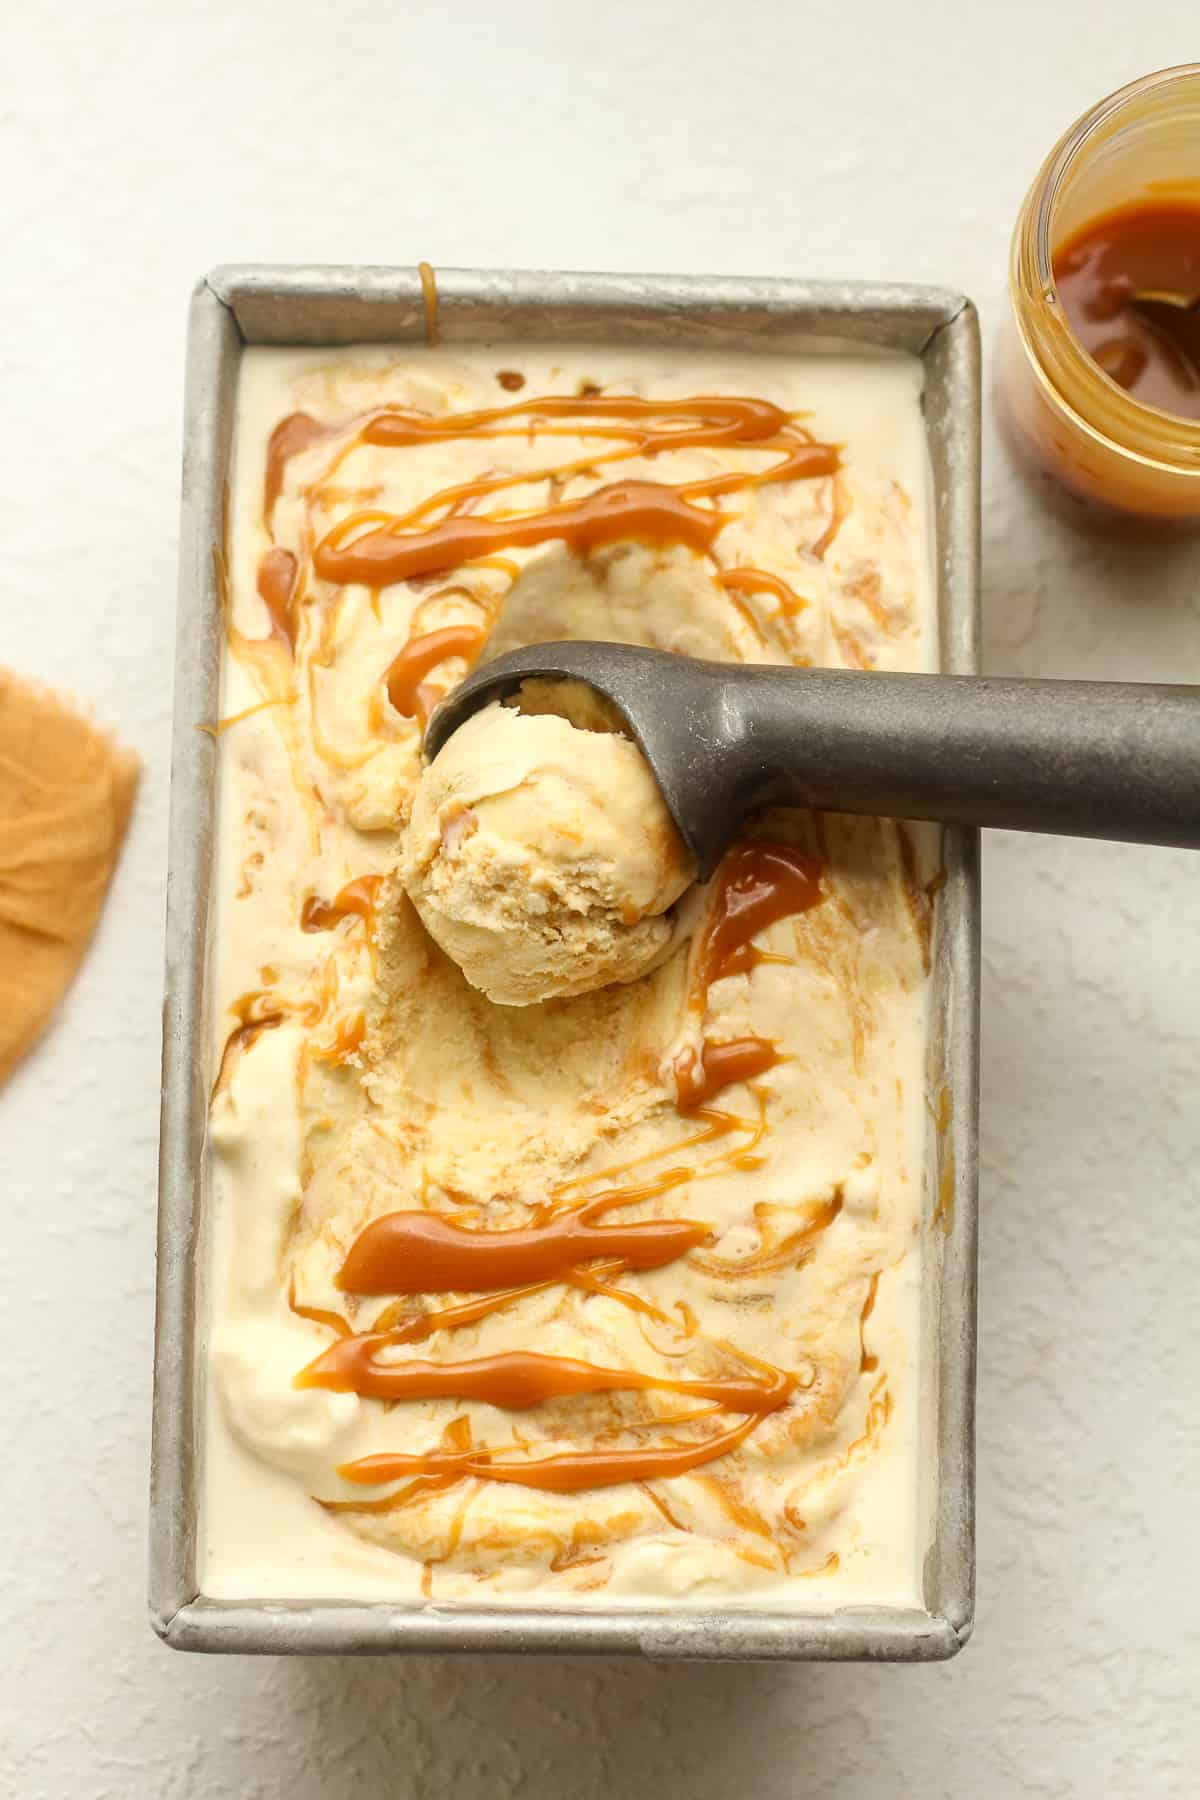 Overhead view of a pan of caramel ice cream with a scoop scooping it up.